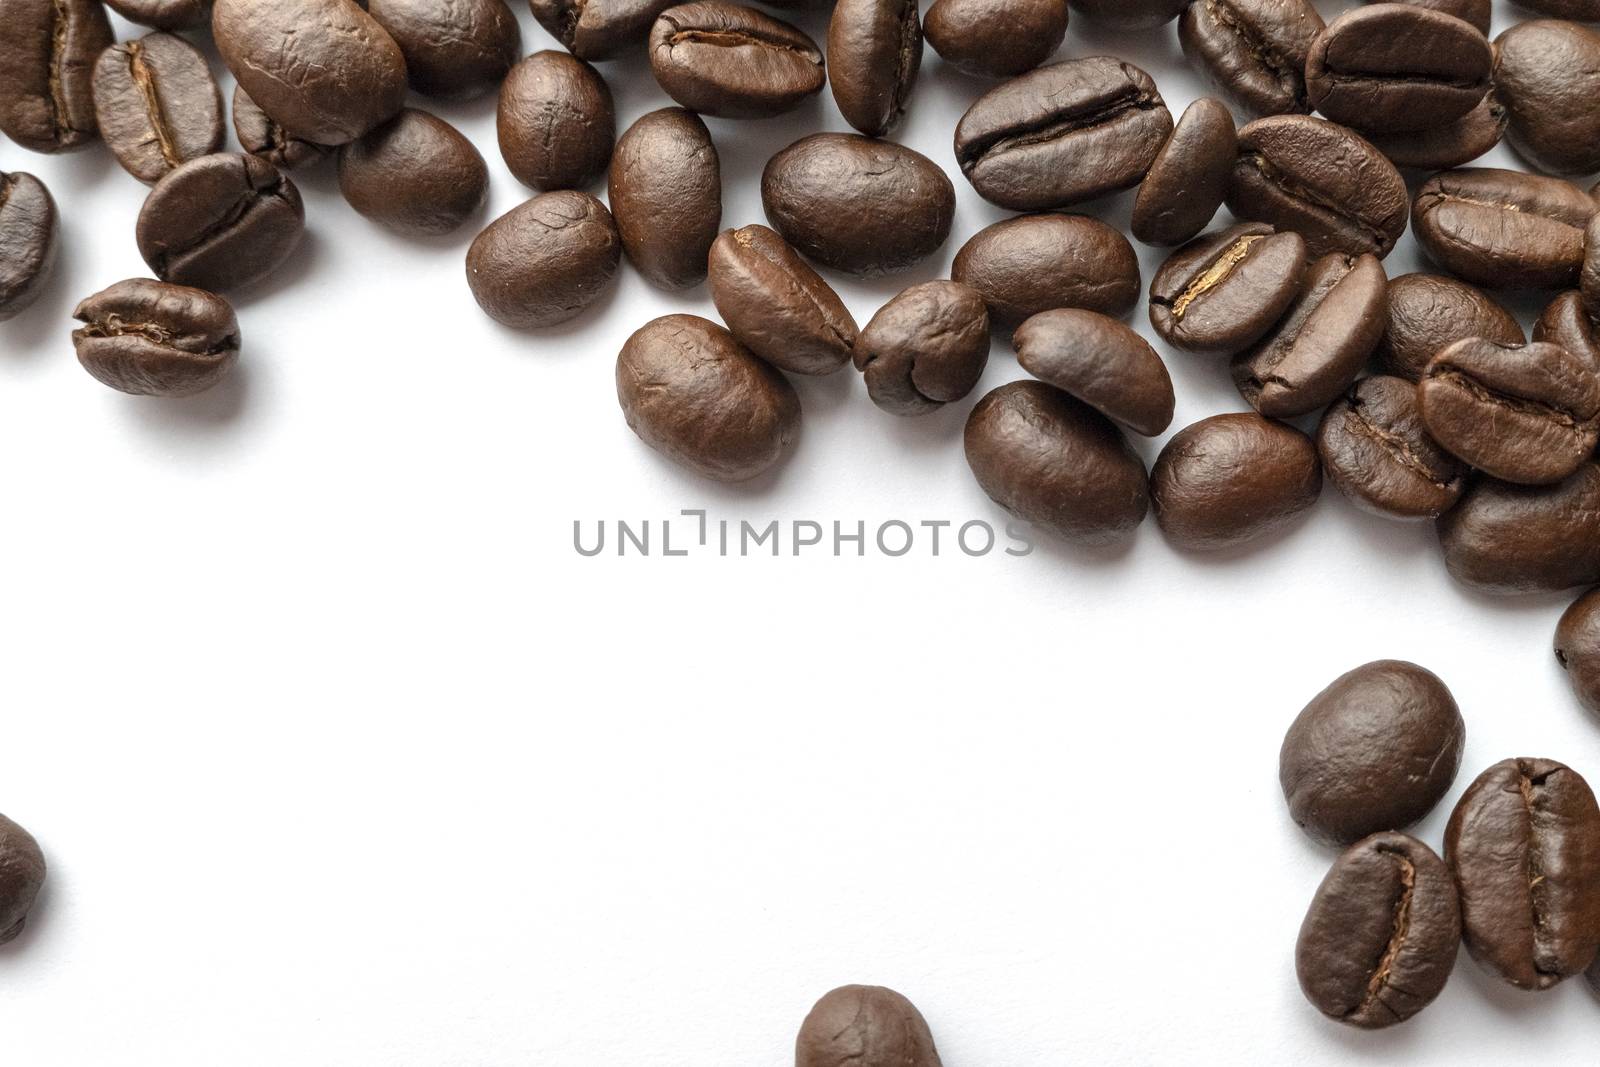 Roasted coffee beans isolated on white background. Close-up image.